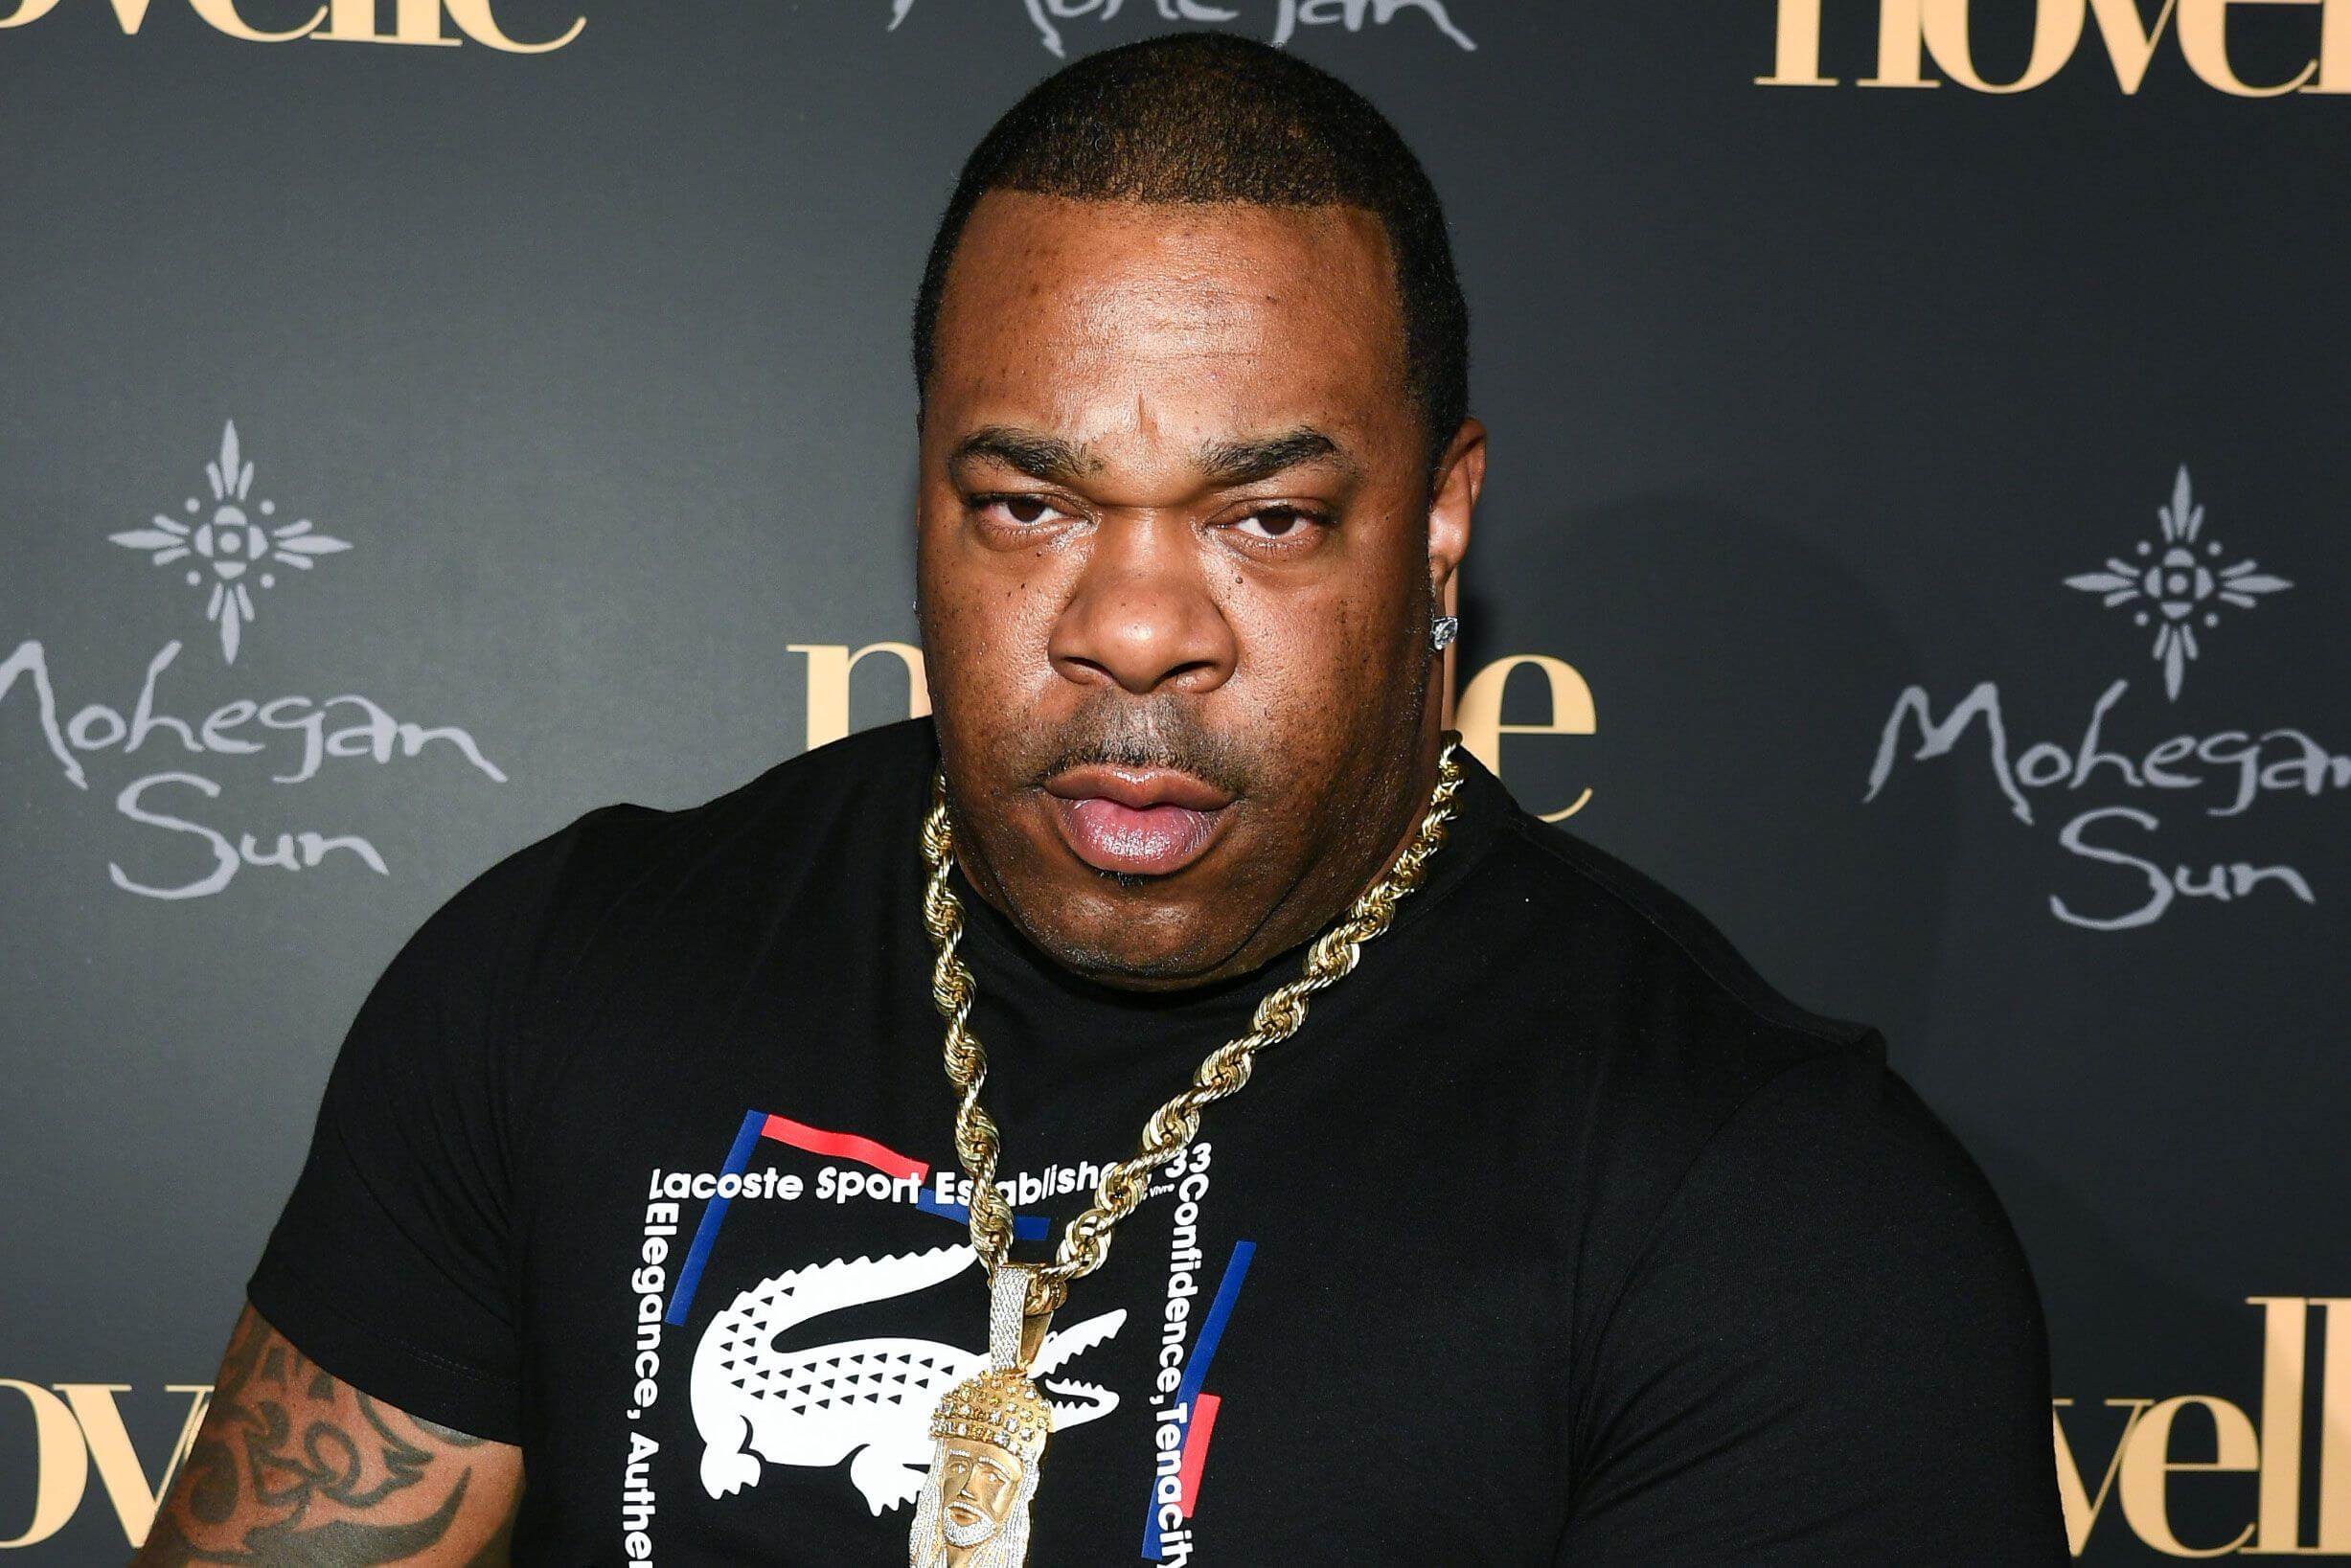 Busta Rhymes Net Worth, Age, Height, Weight, Awards, and Achievements